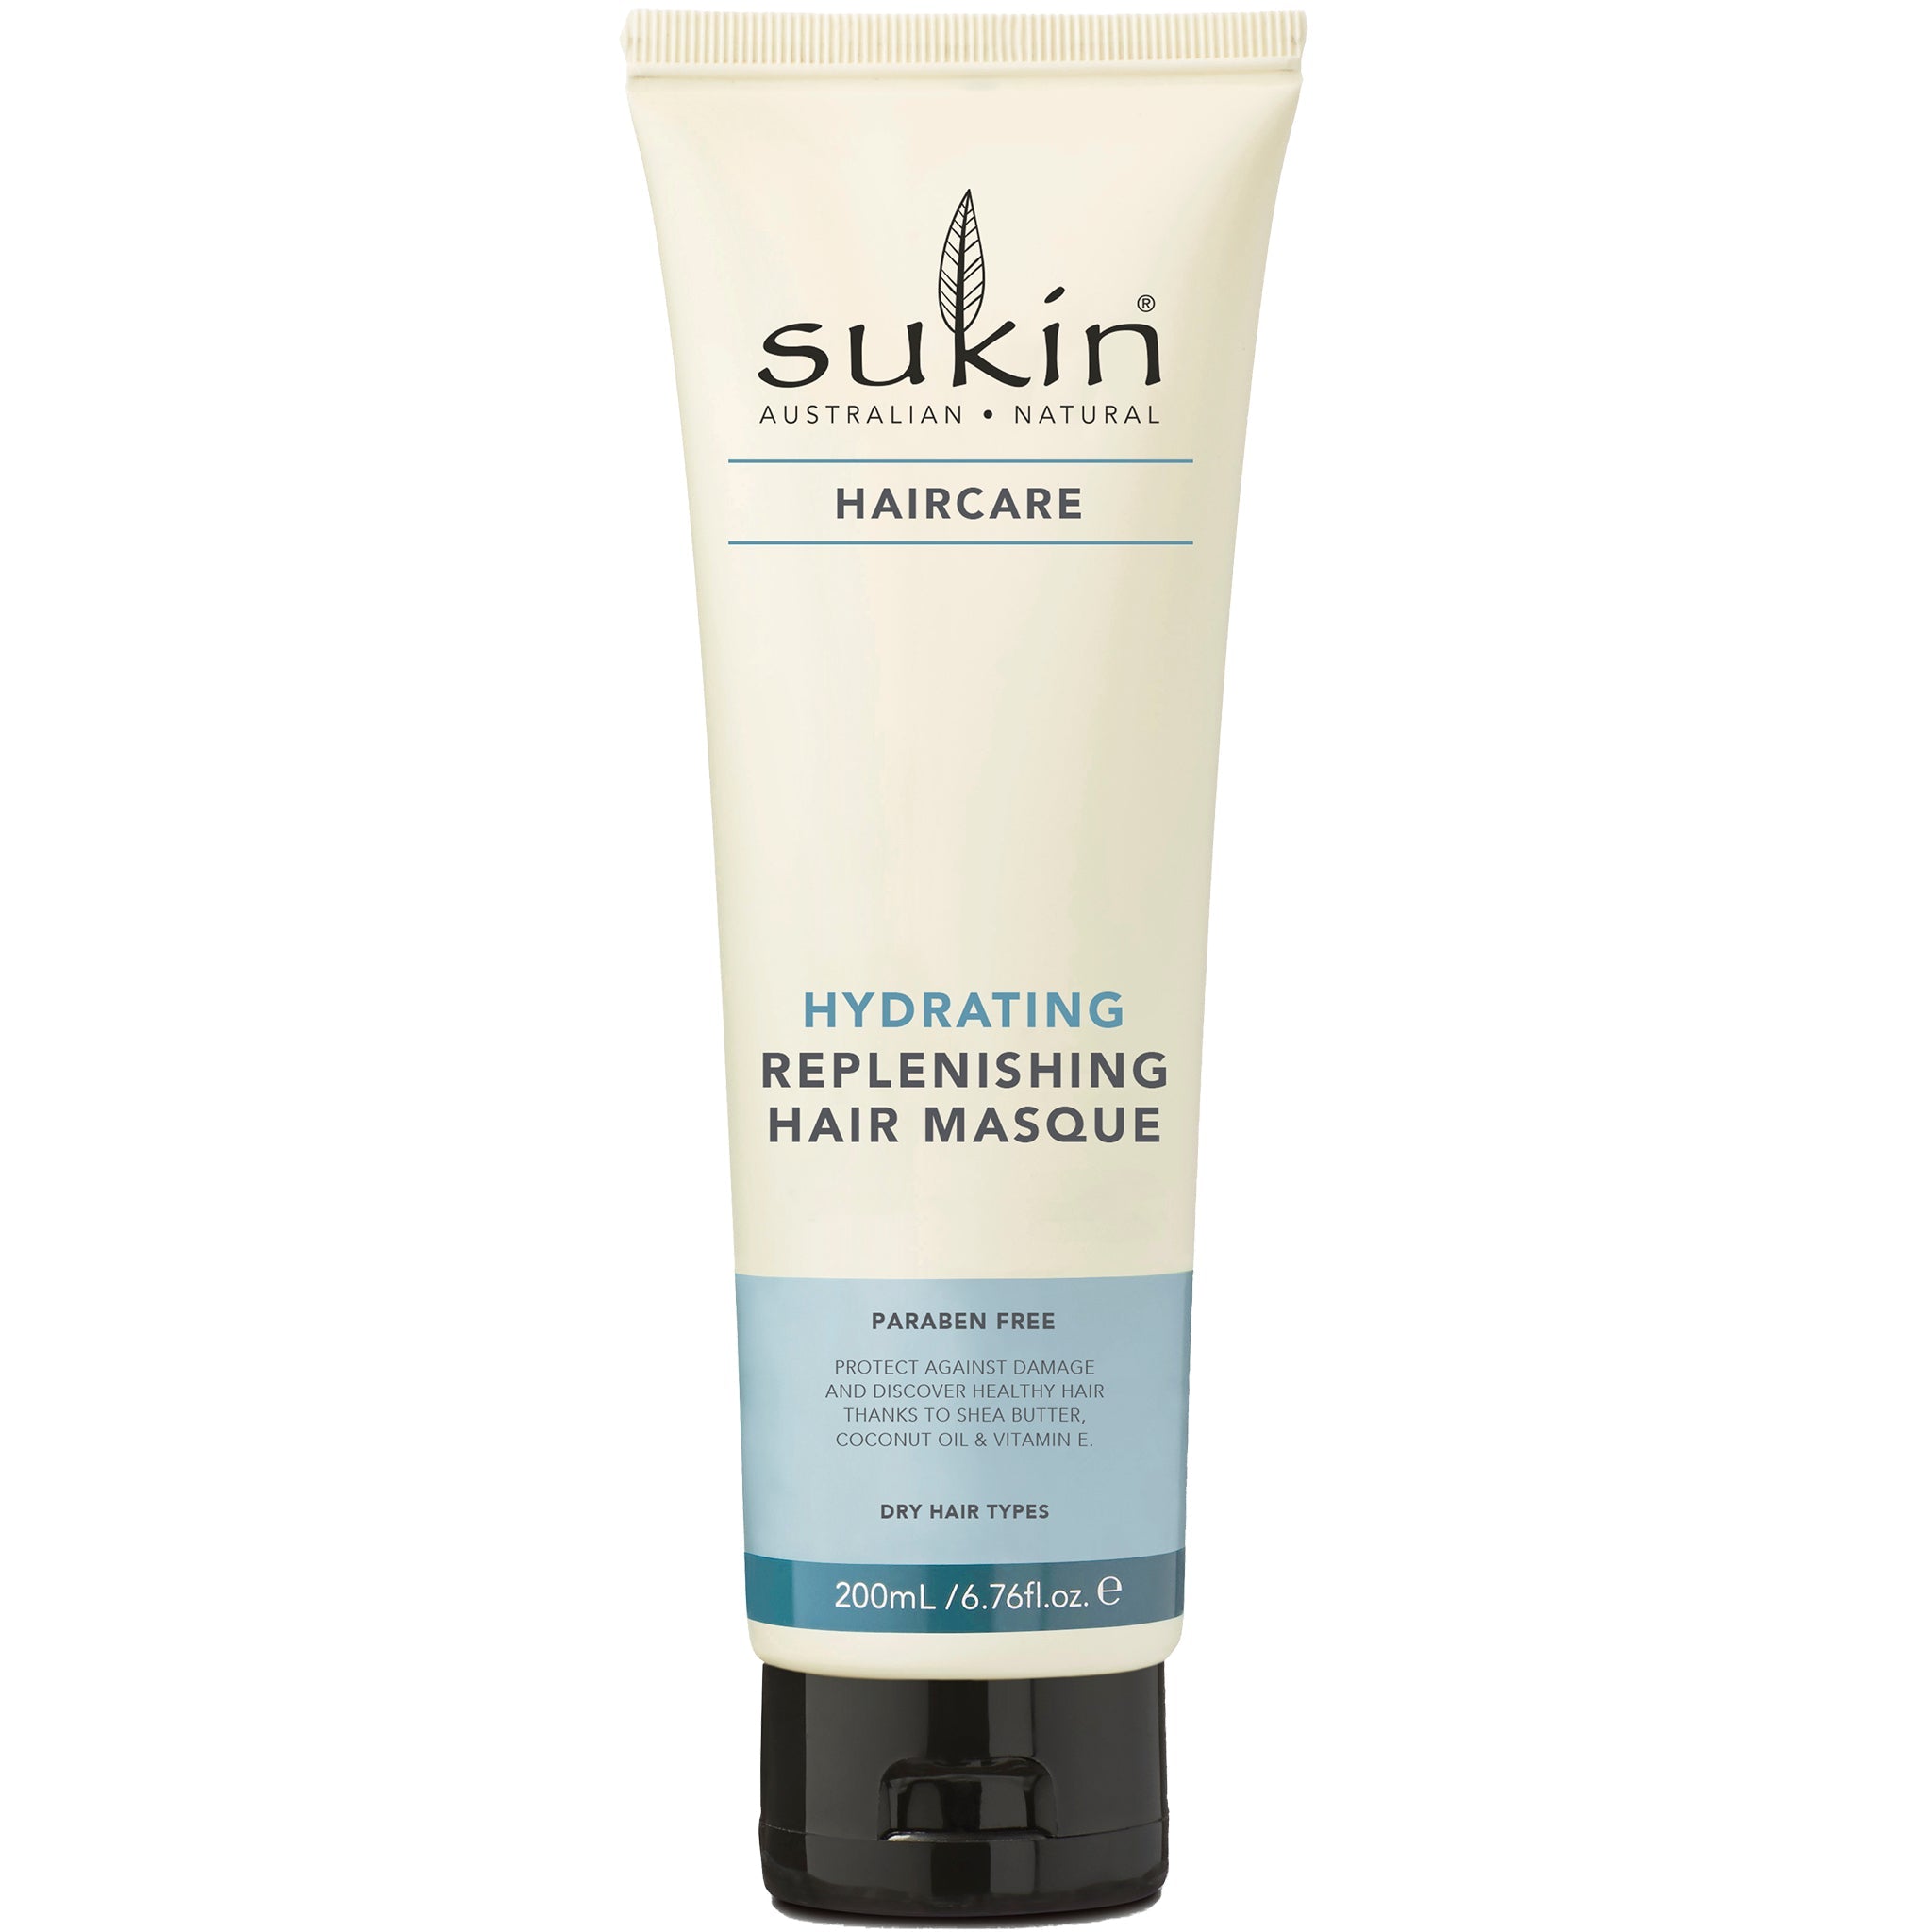 Hydrating Hair Masque - mypure.co.uk